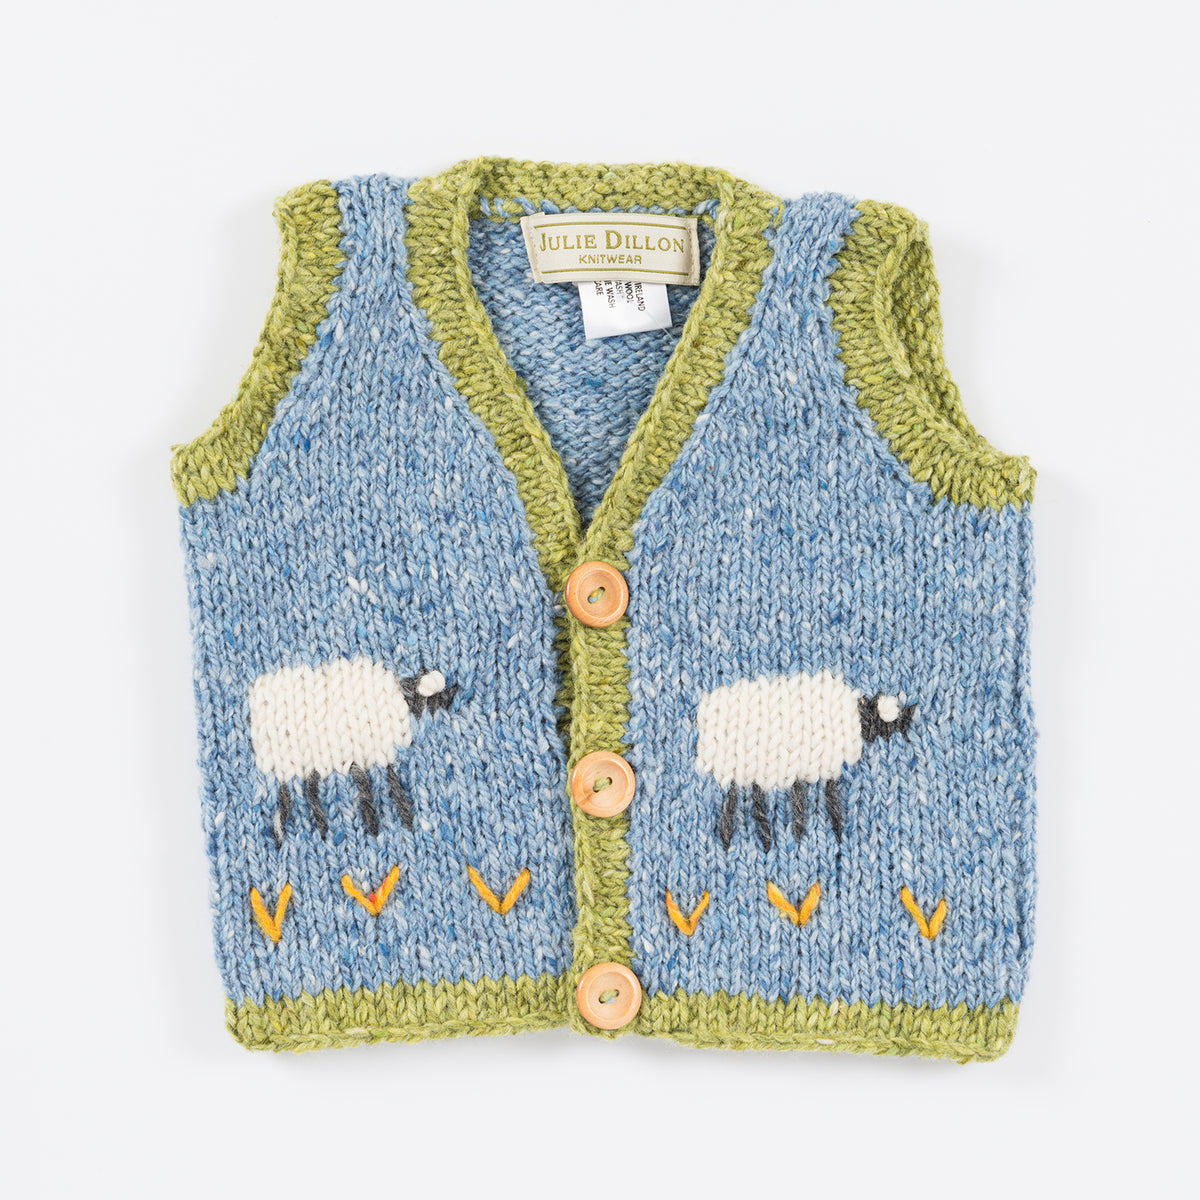 Handknitted Baby Waistcoat - Blue with Sheep motif